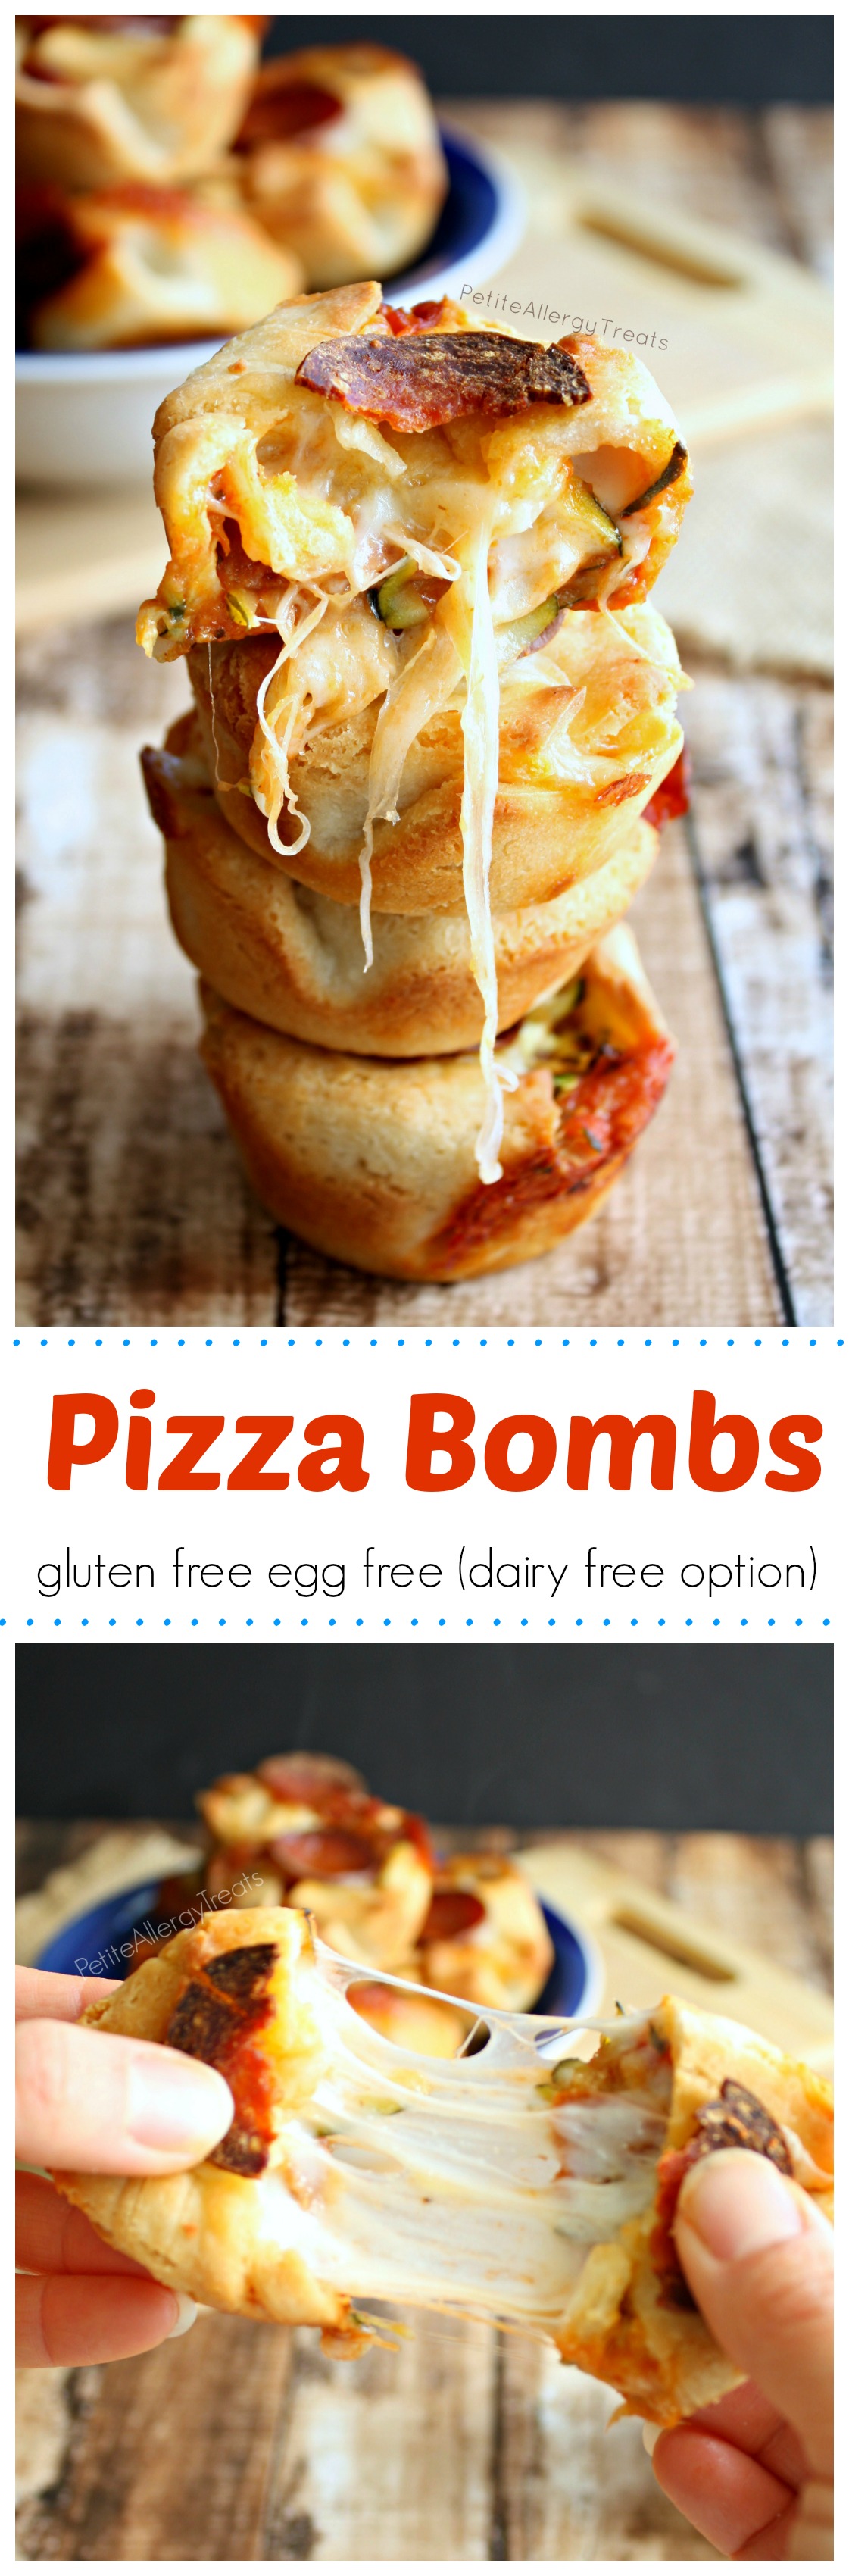 Pizza Bomb Bites (gluten free egg free, dairy free option)- Pizza pockets filled with gooey cheese and vegetables